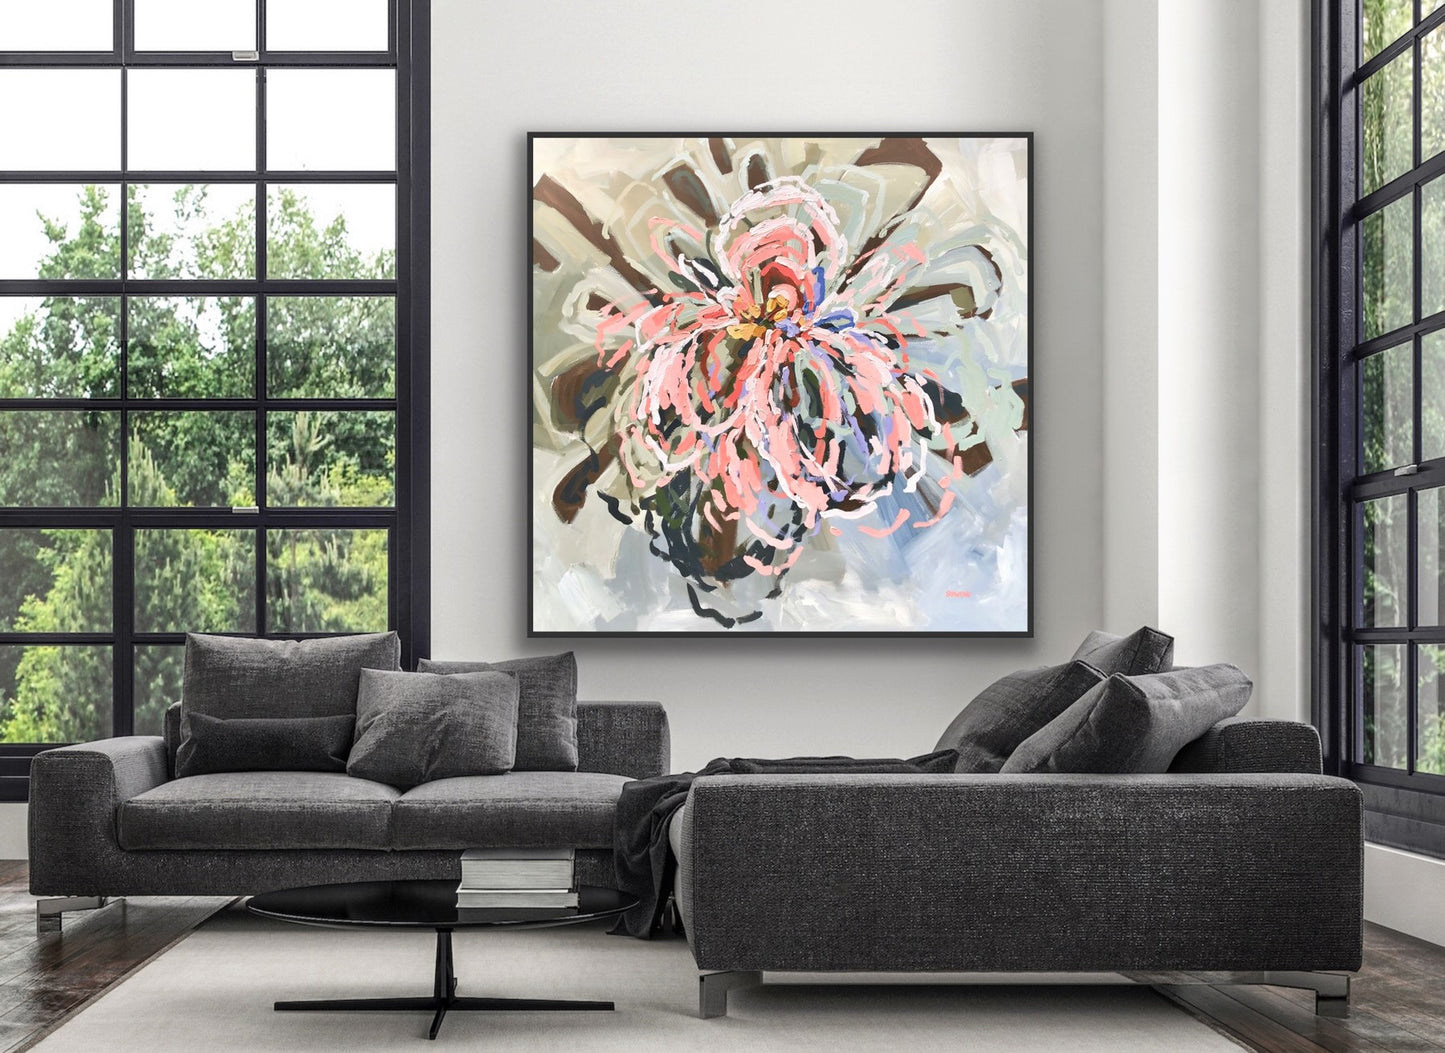 Sweethearts In Love 153x153cm FRAMED SOLD